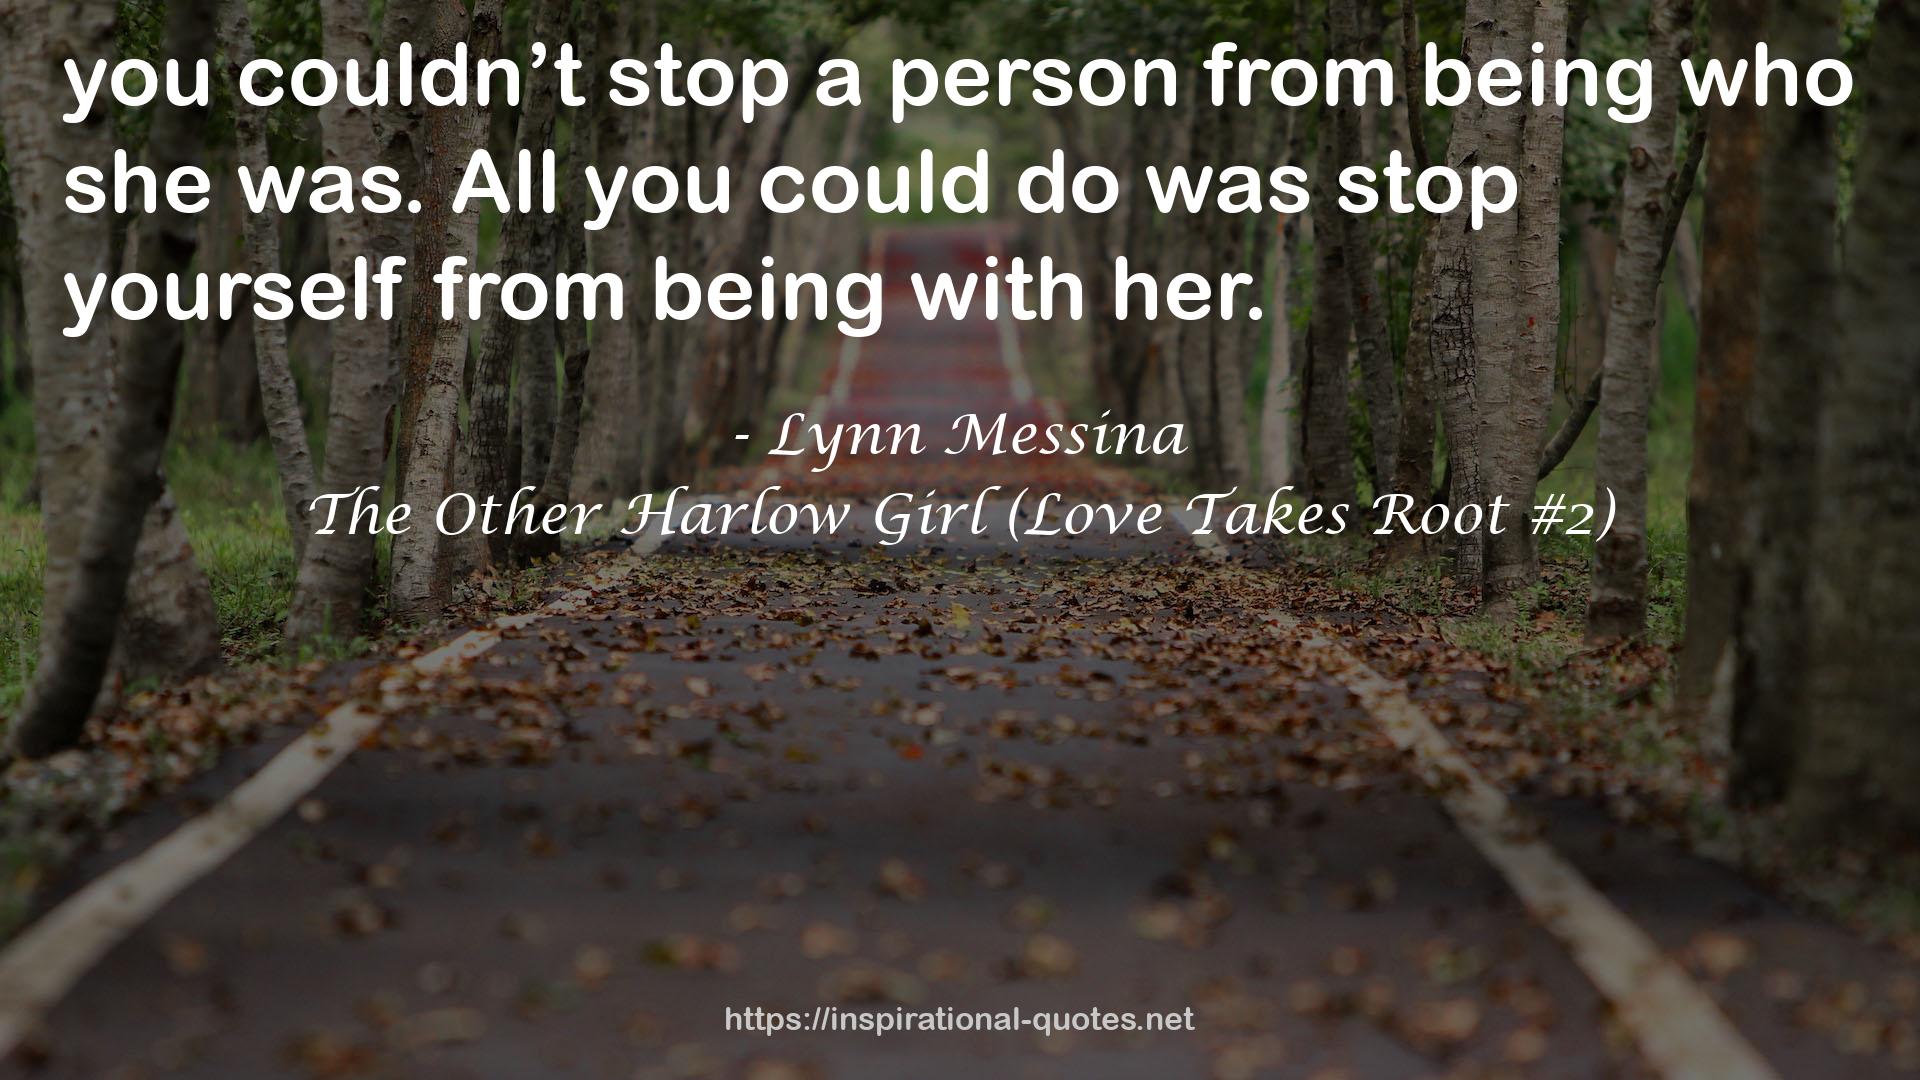 The Other Harlow Girl (Love Takes Root #2) QUOTES